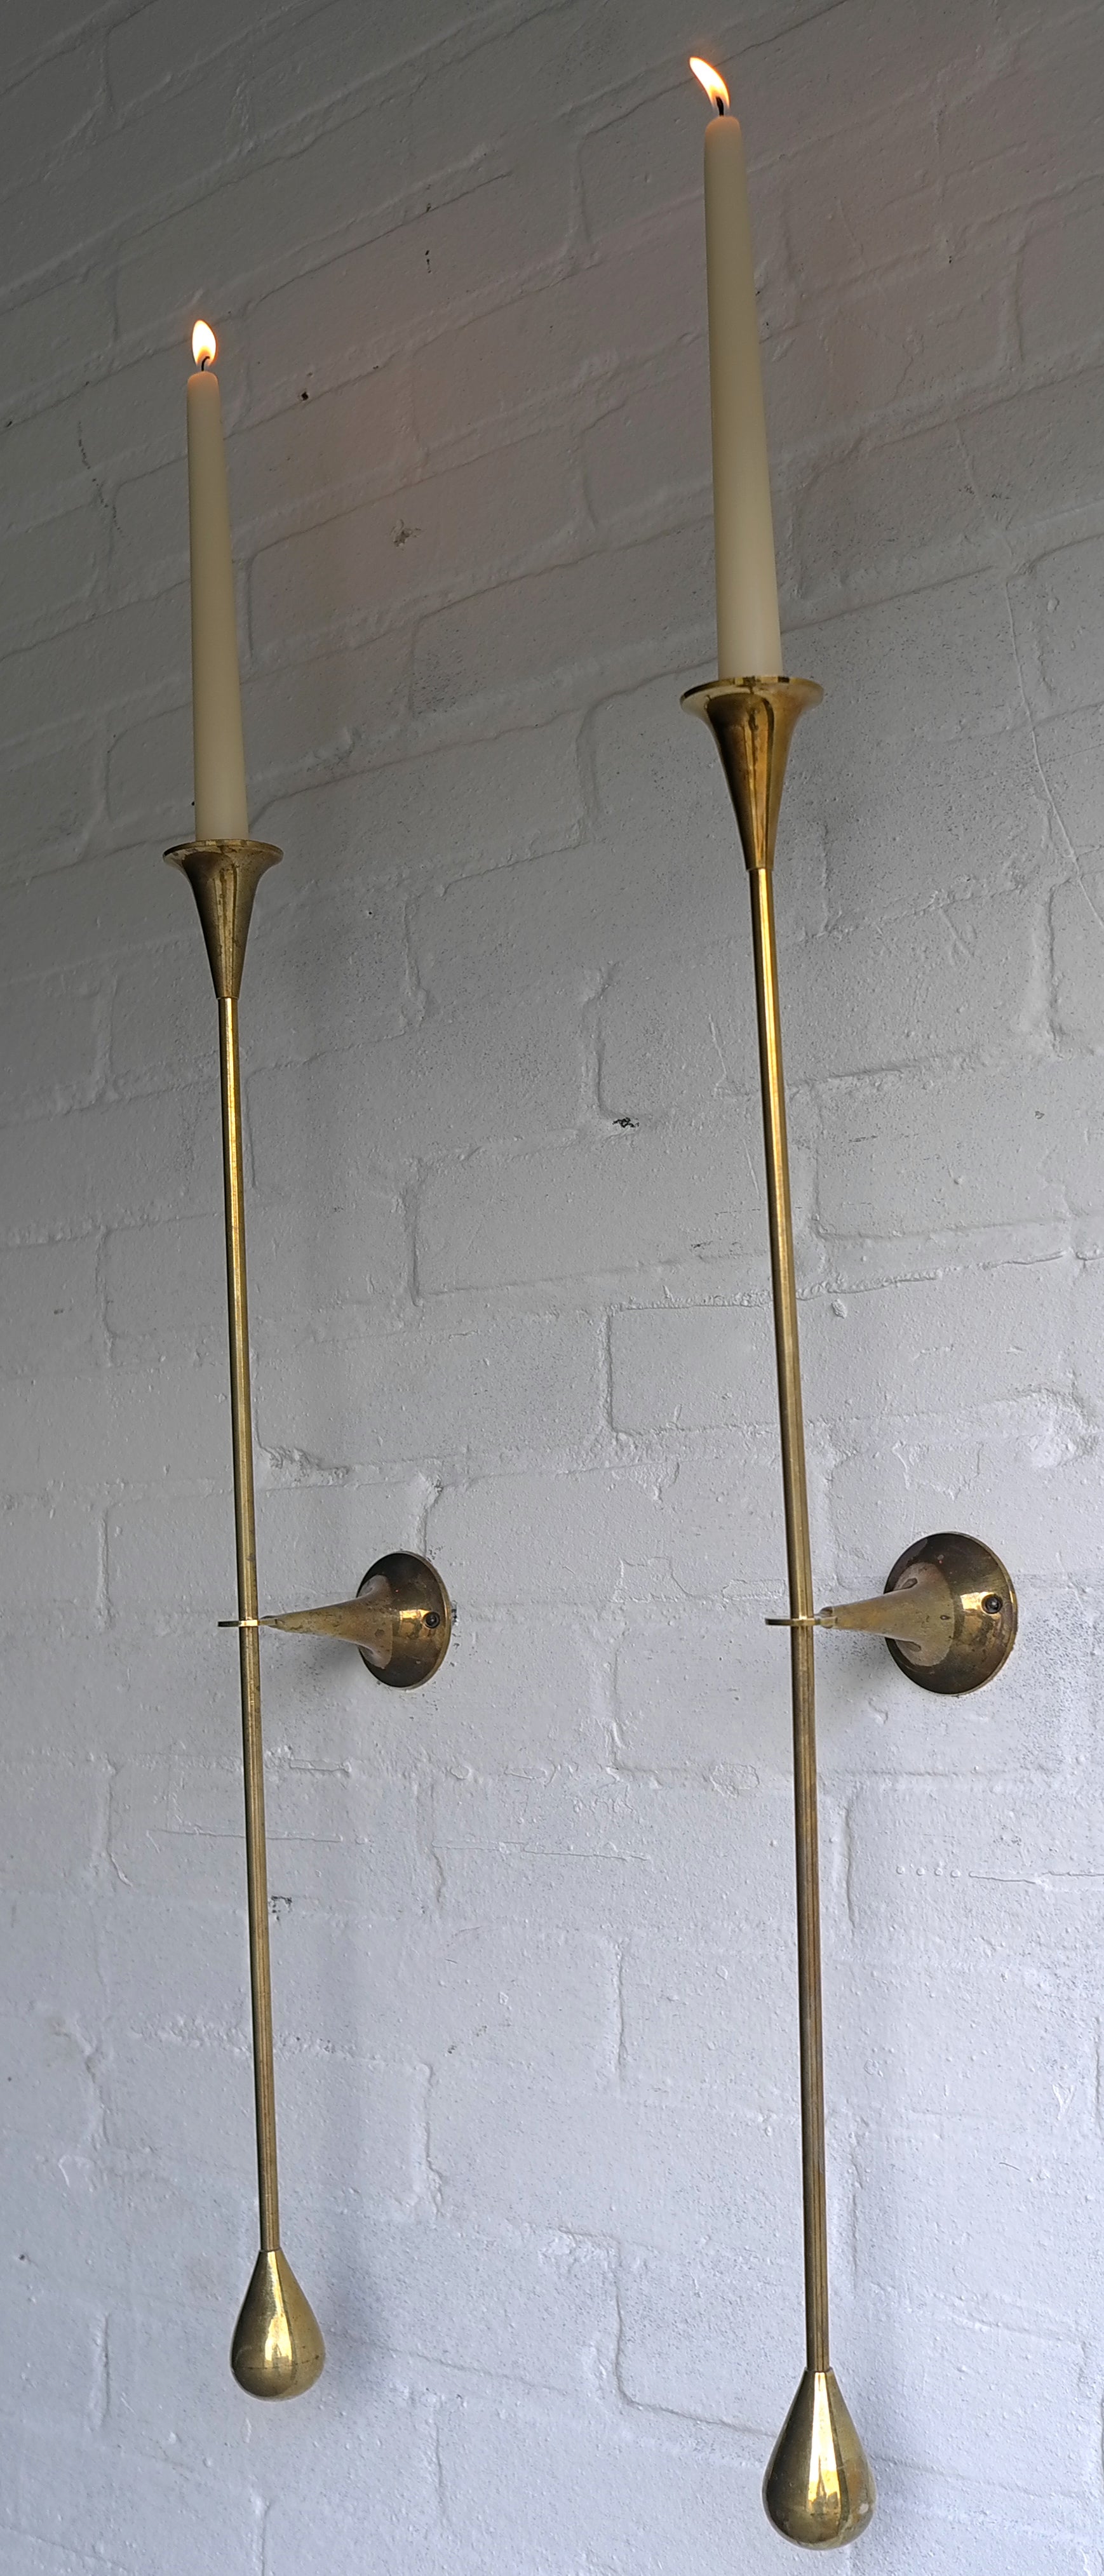 Fine Pair of Large Brass Candle Wall Sconces